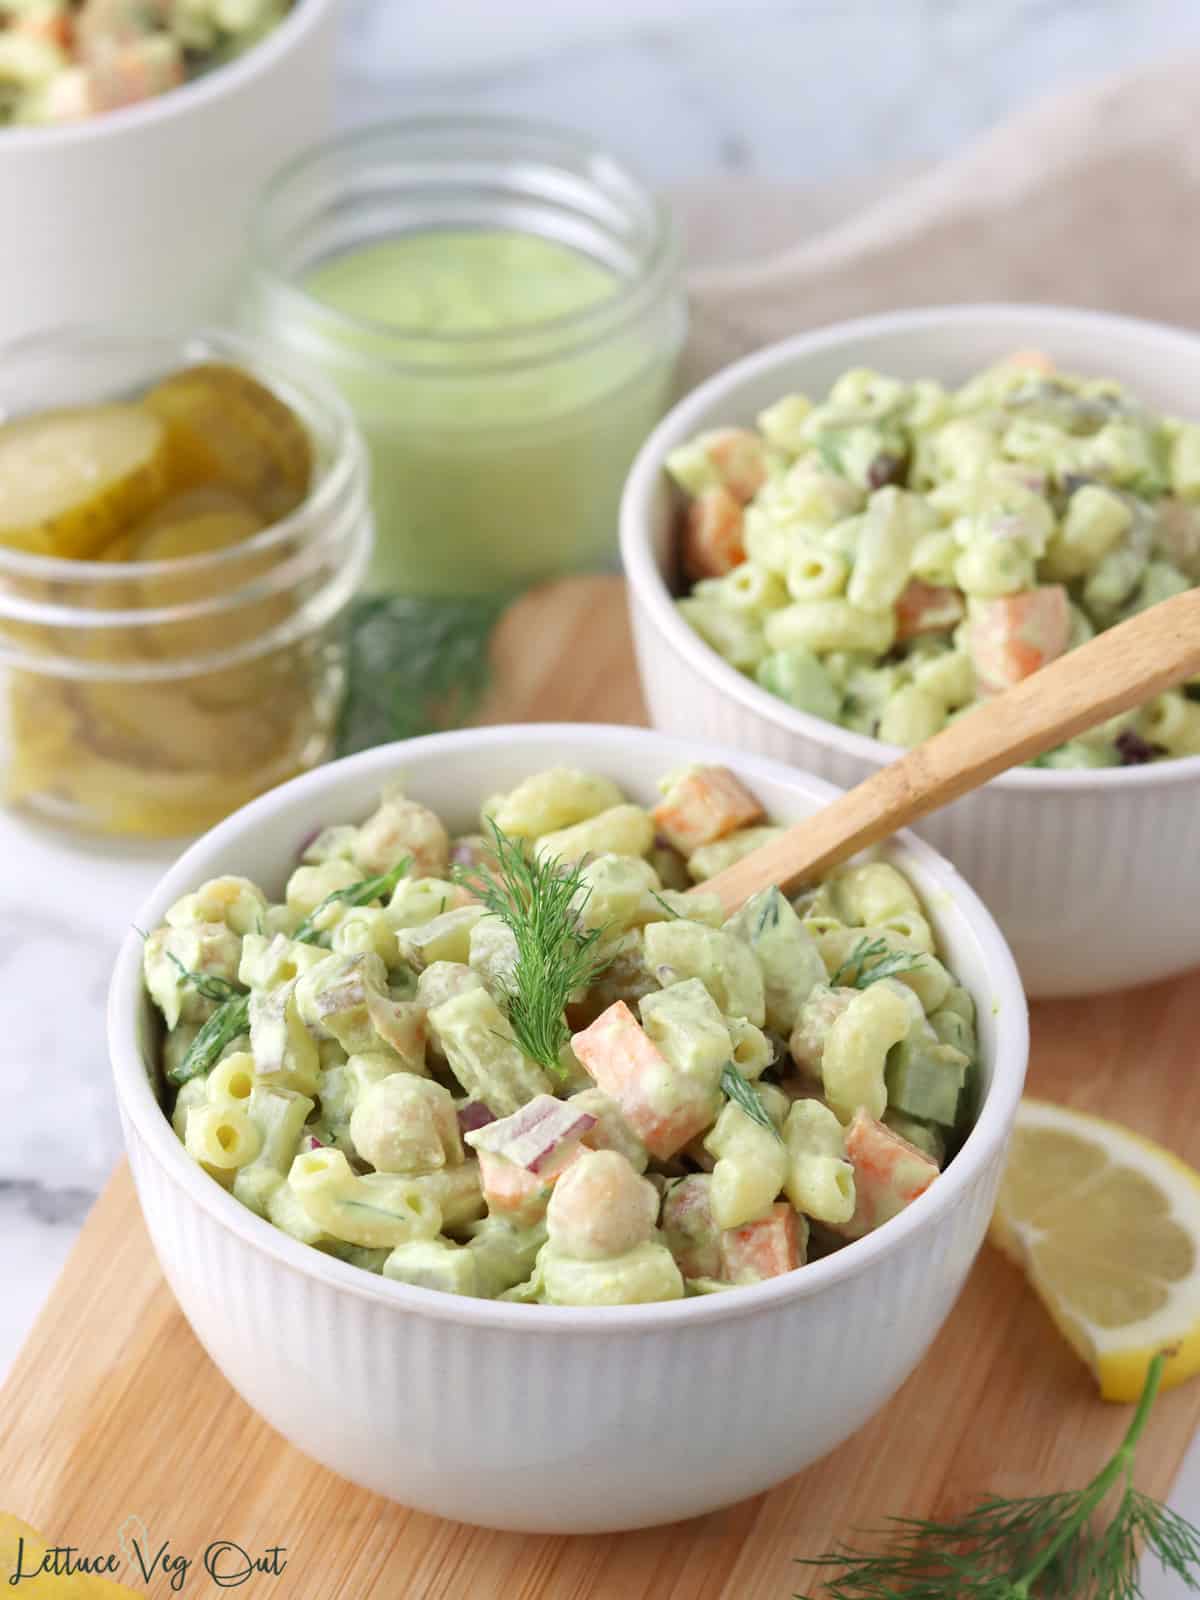 Two small bowls of dill pickle macaroni salad on wood board with lemon and pickle garnishes.